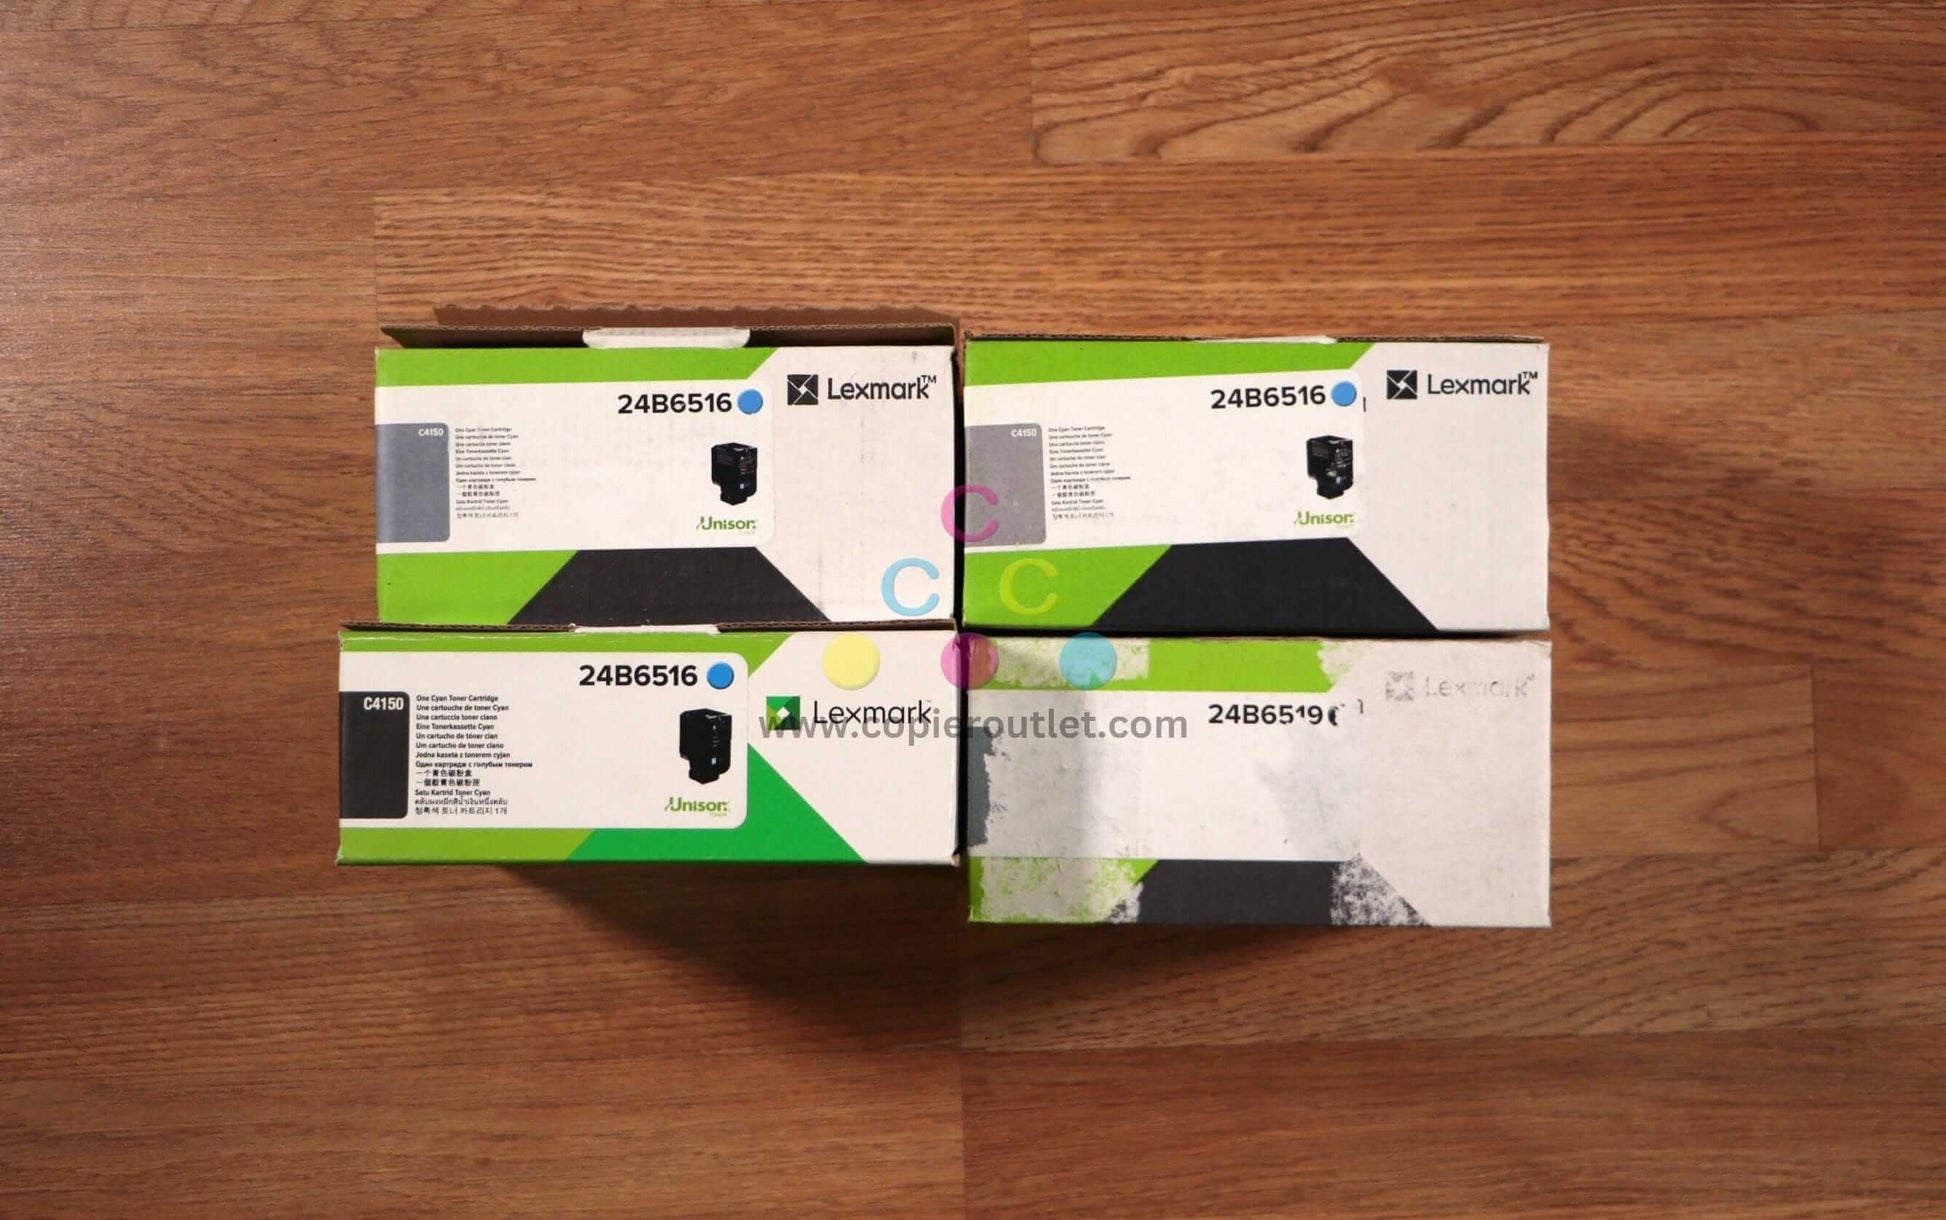 Used Lot of 4 Lexmark 24B6516,19 CCCK Toner Cartridges C4150 Same Day Shipping!! - copier-clearance-center